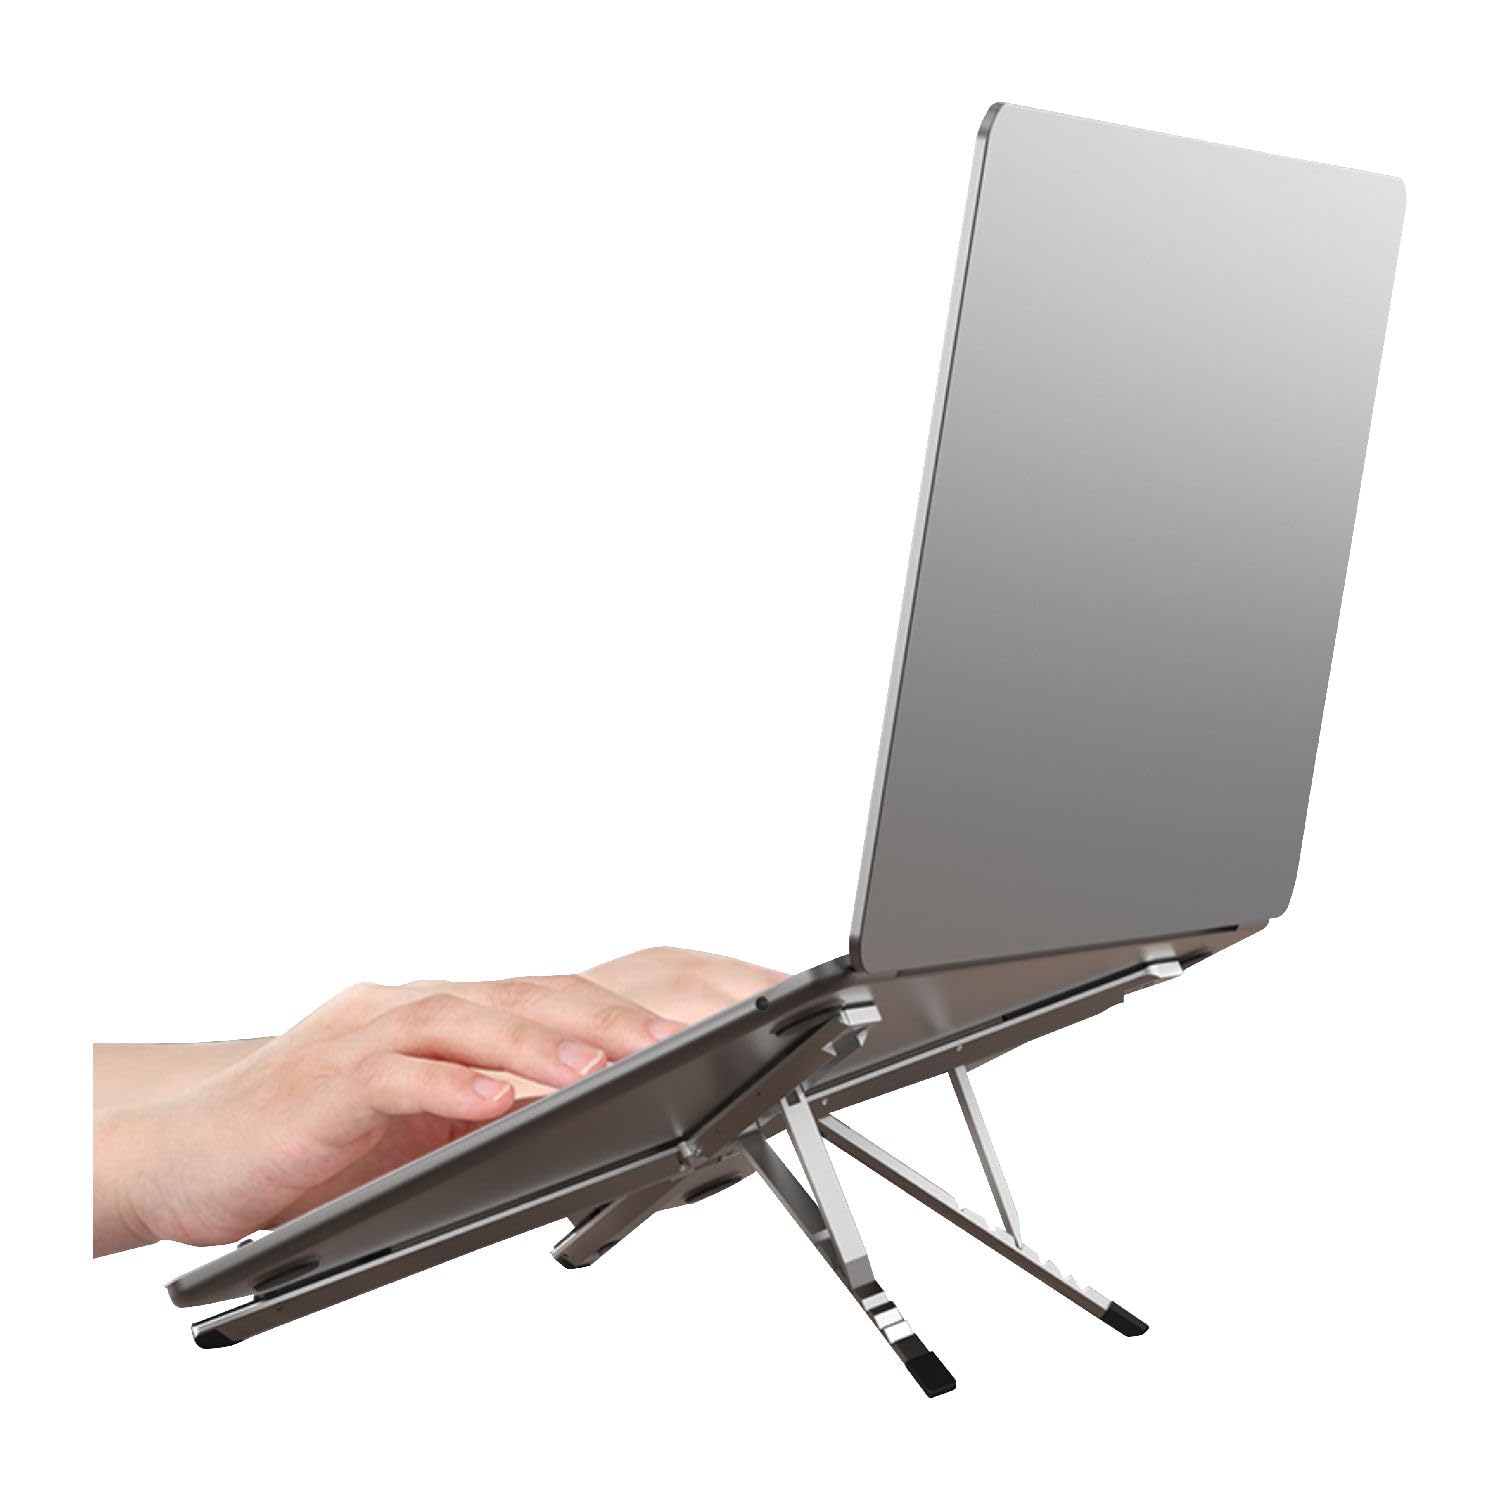 Digitek DPLS 001 Portable Laptop & Tablet Stand Max. 5KG Support, Light Weight & Foldable Compact Palm Size with Six Levels of Angle Adjustment Compatible with MacBook, Laptop, Tablet